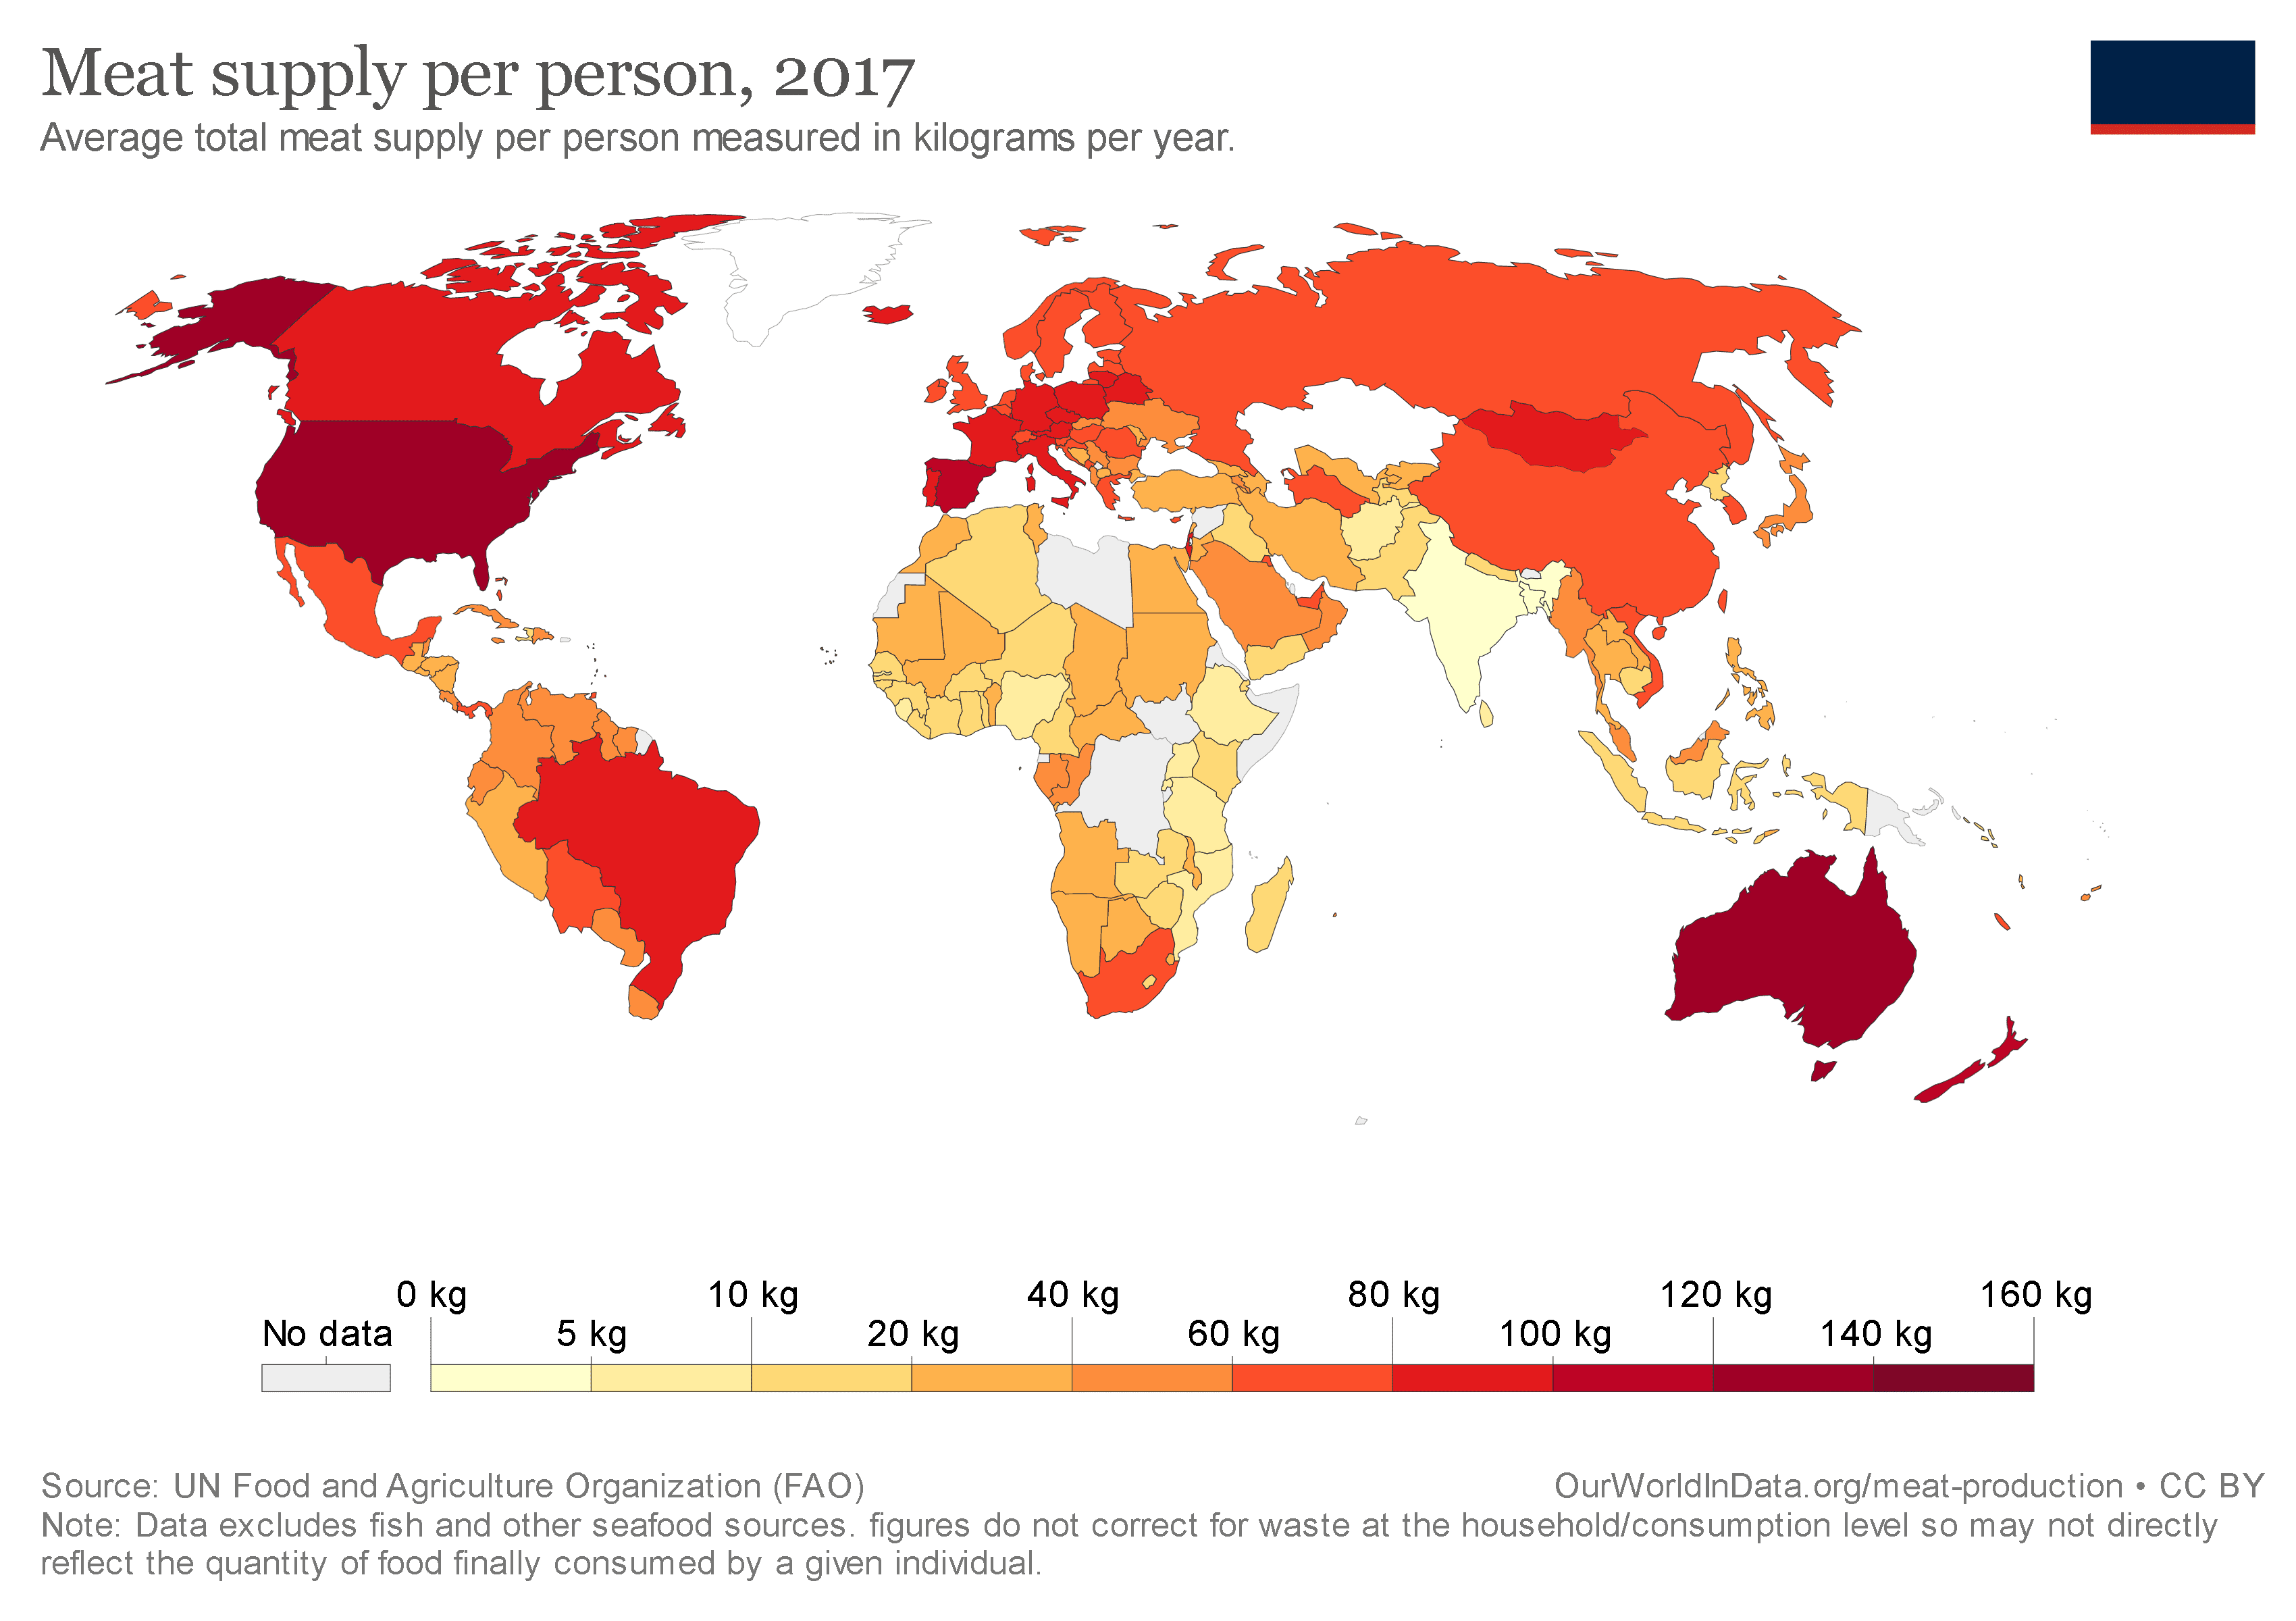 Average total meat supply per person